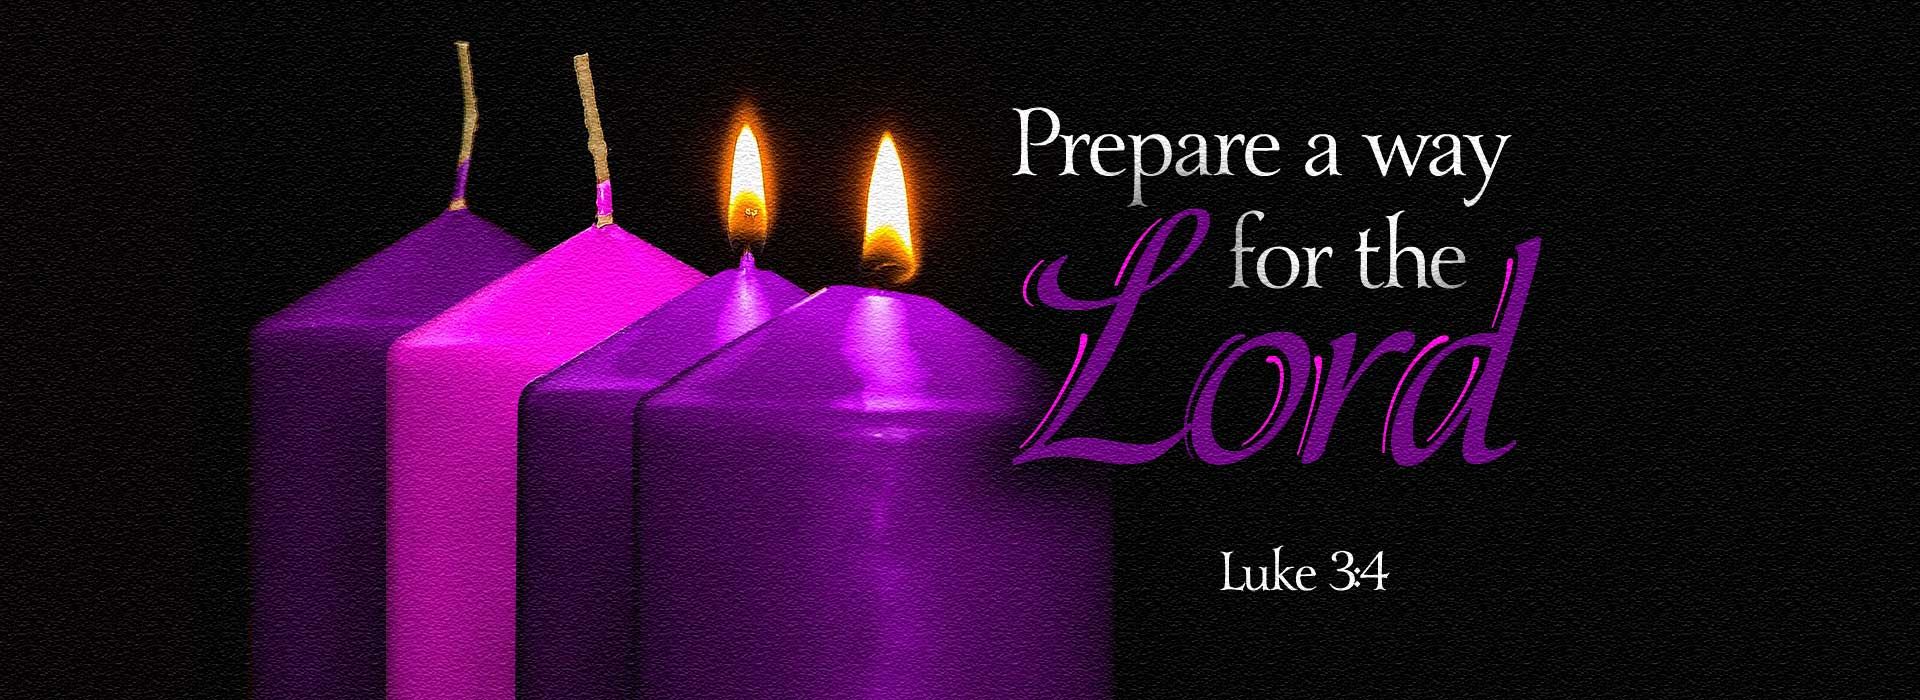 Prepare for the Lord